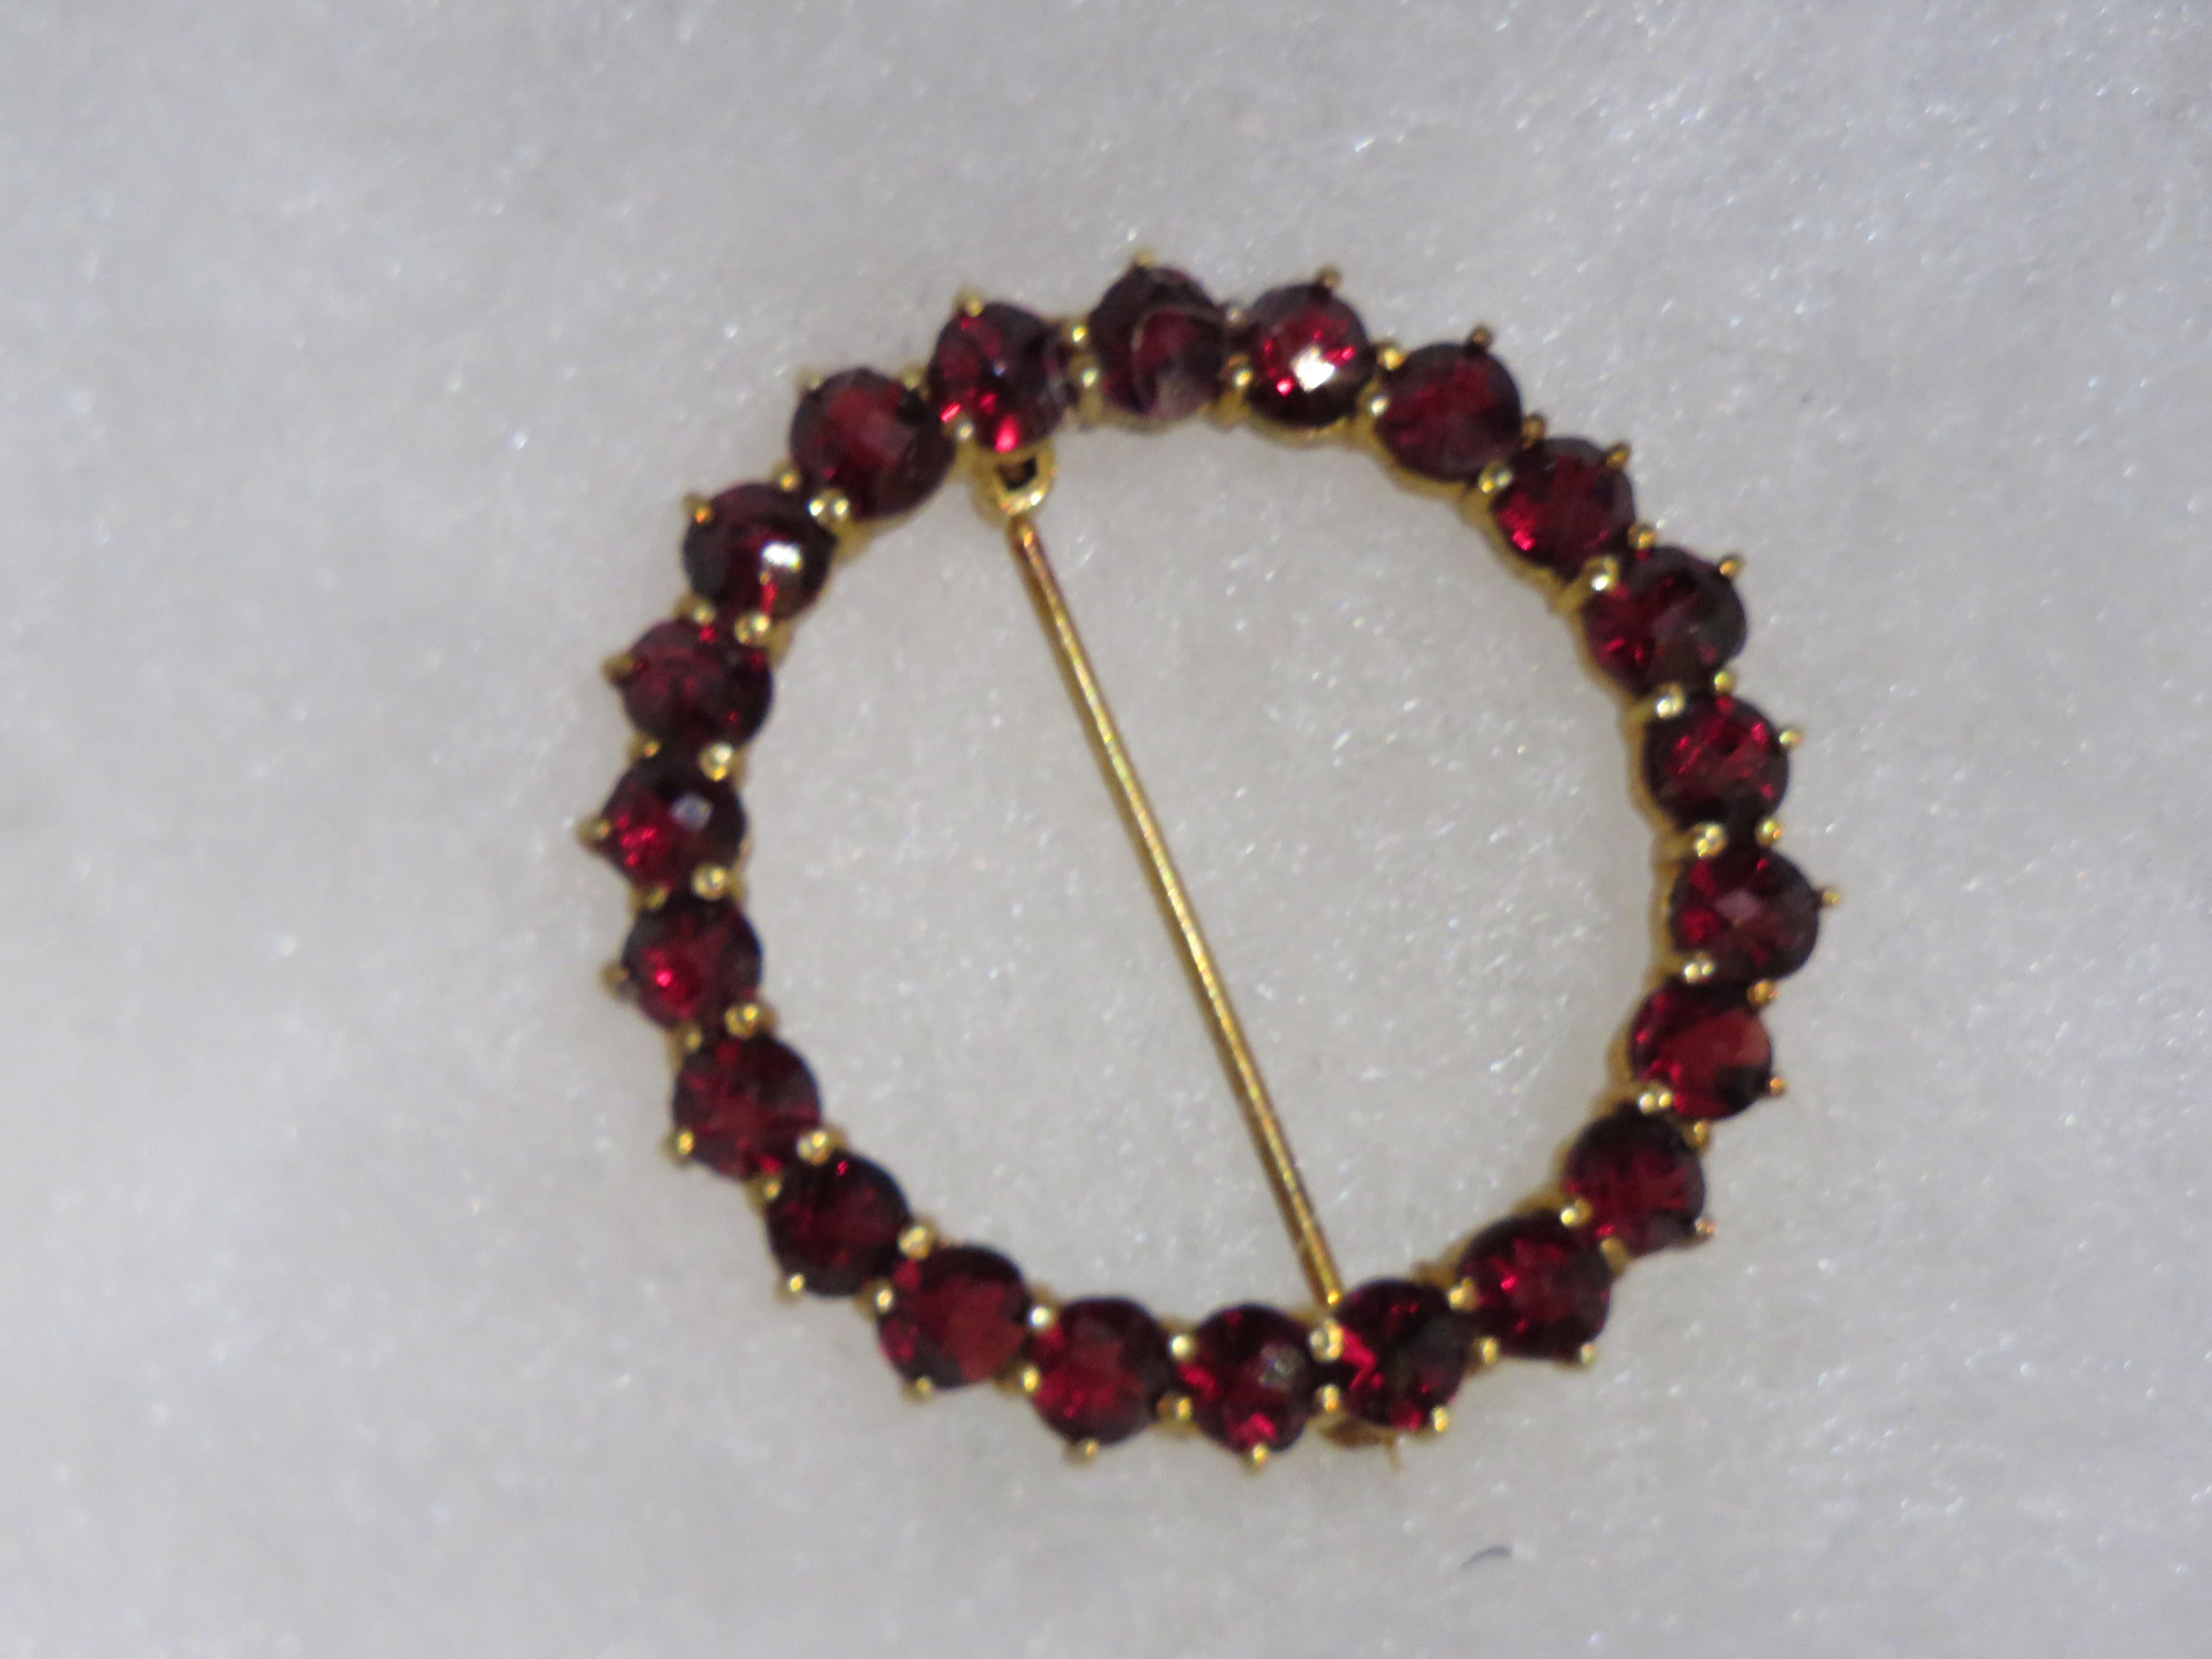 The Following Item we are offering is a Rare Important Radiant 14KT Gold Red Garnet Circular Brooch Pin. This Rare Piece Magnificent Rare Round Cut Glittering Garnets. Stones are Very Clean and Extremely Fine! T.C.W. approx 5CTS and measures approx